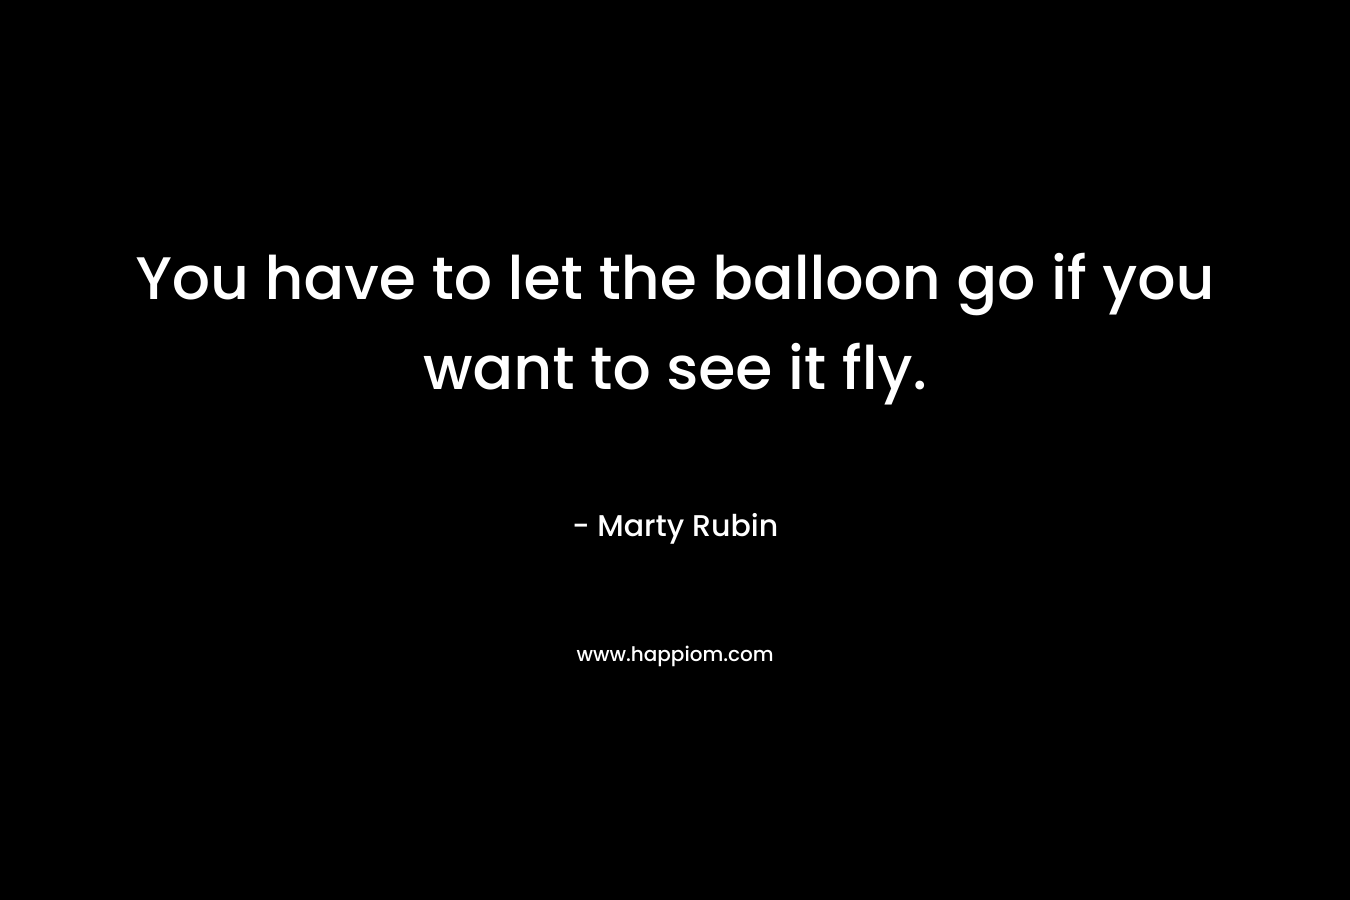 You have to let the balloon go if you want to see it fly. – Marty Rubin